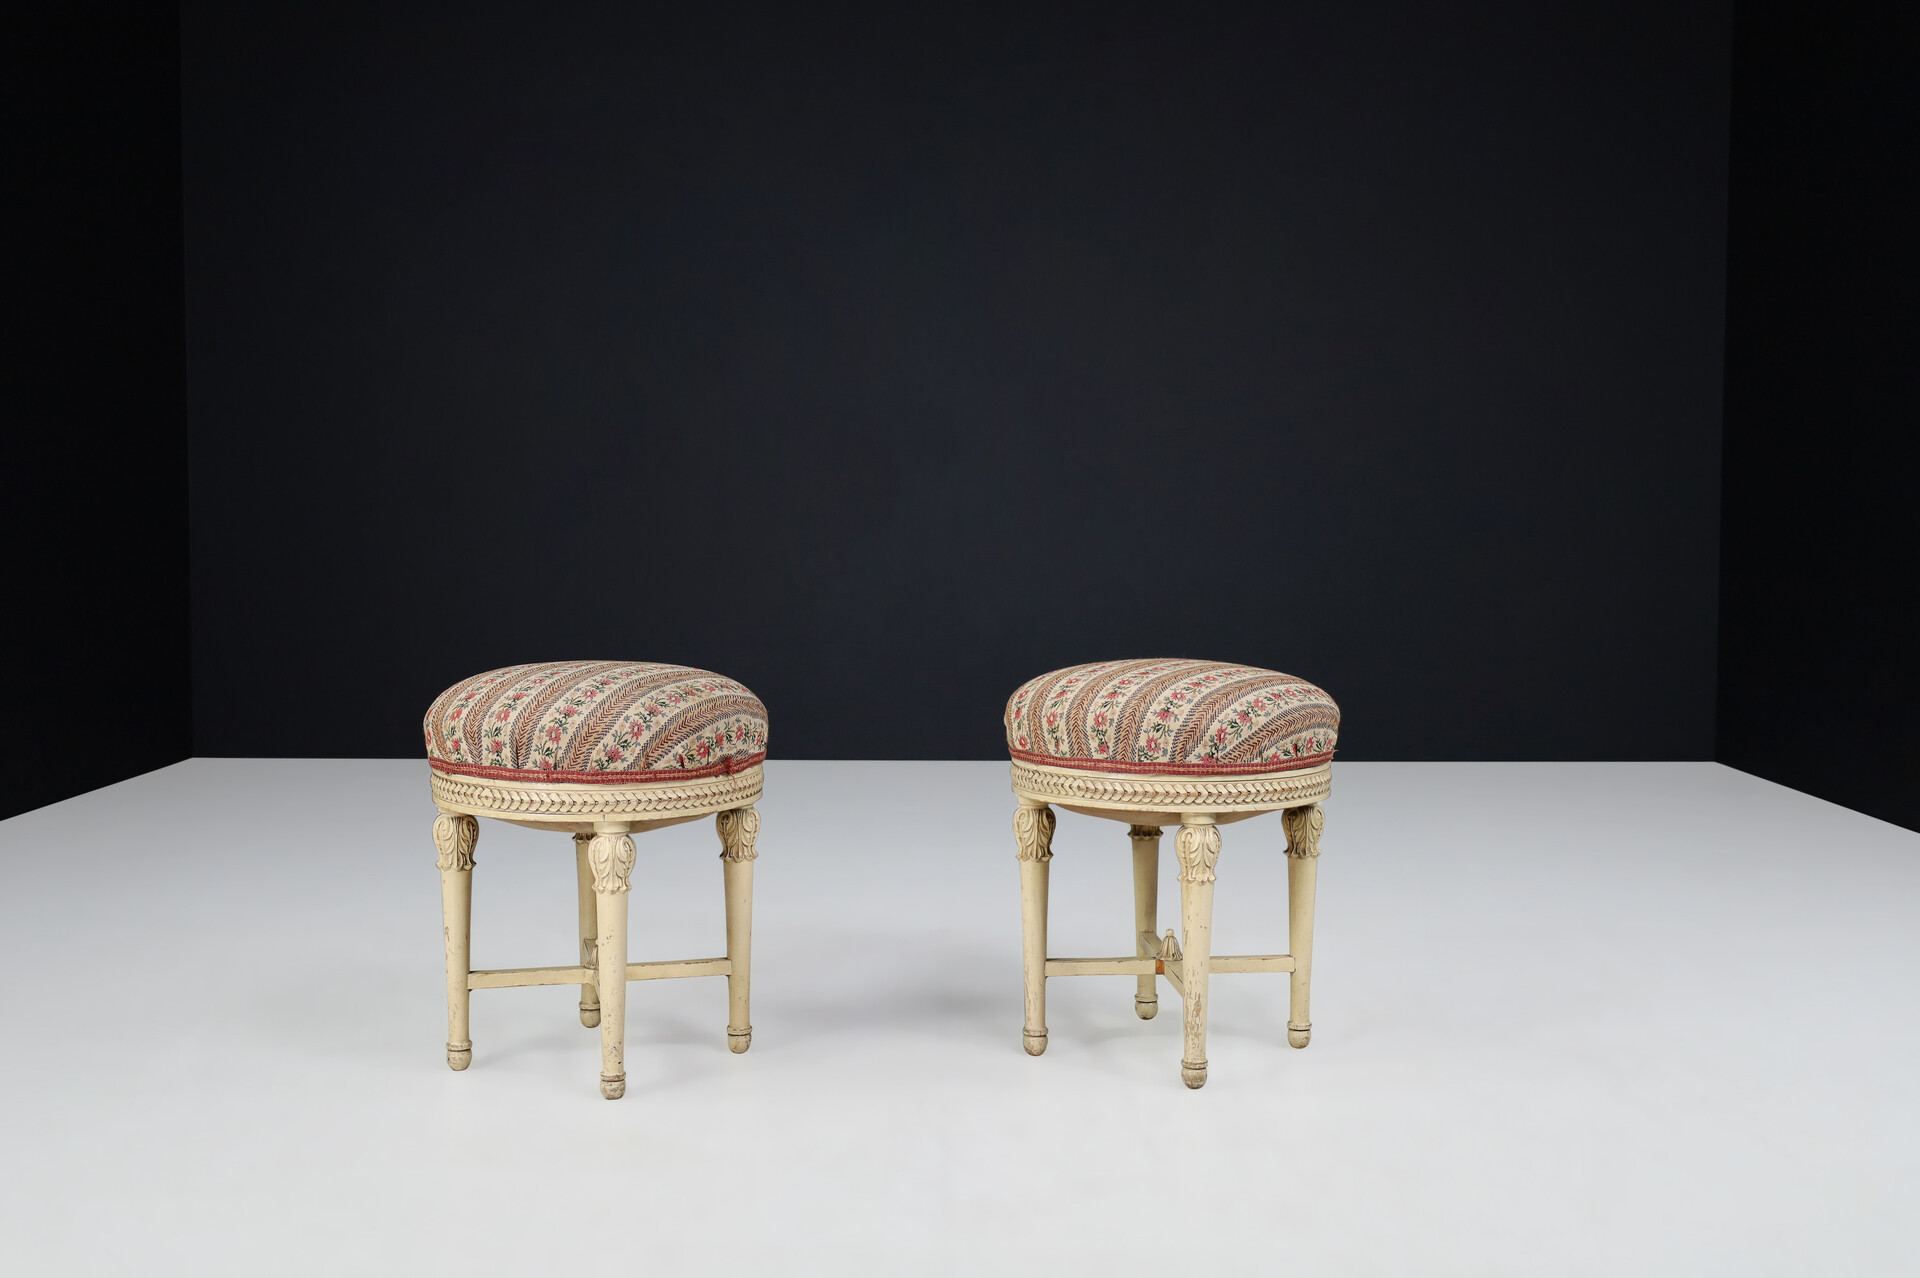 Antique Painted wood and upholstery stools, Vienna 1920s 20th century